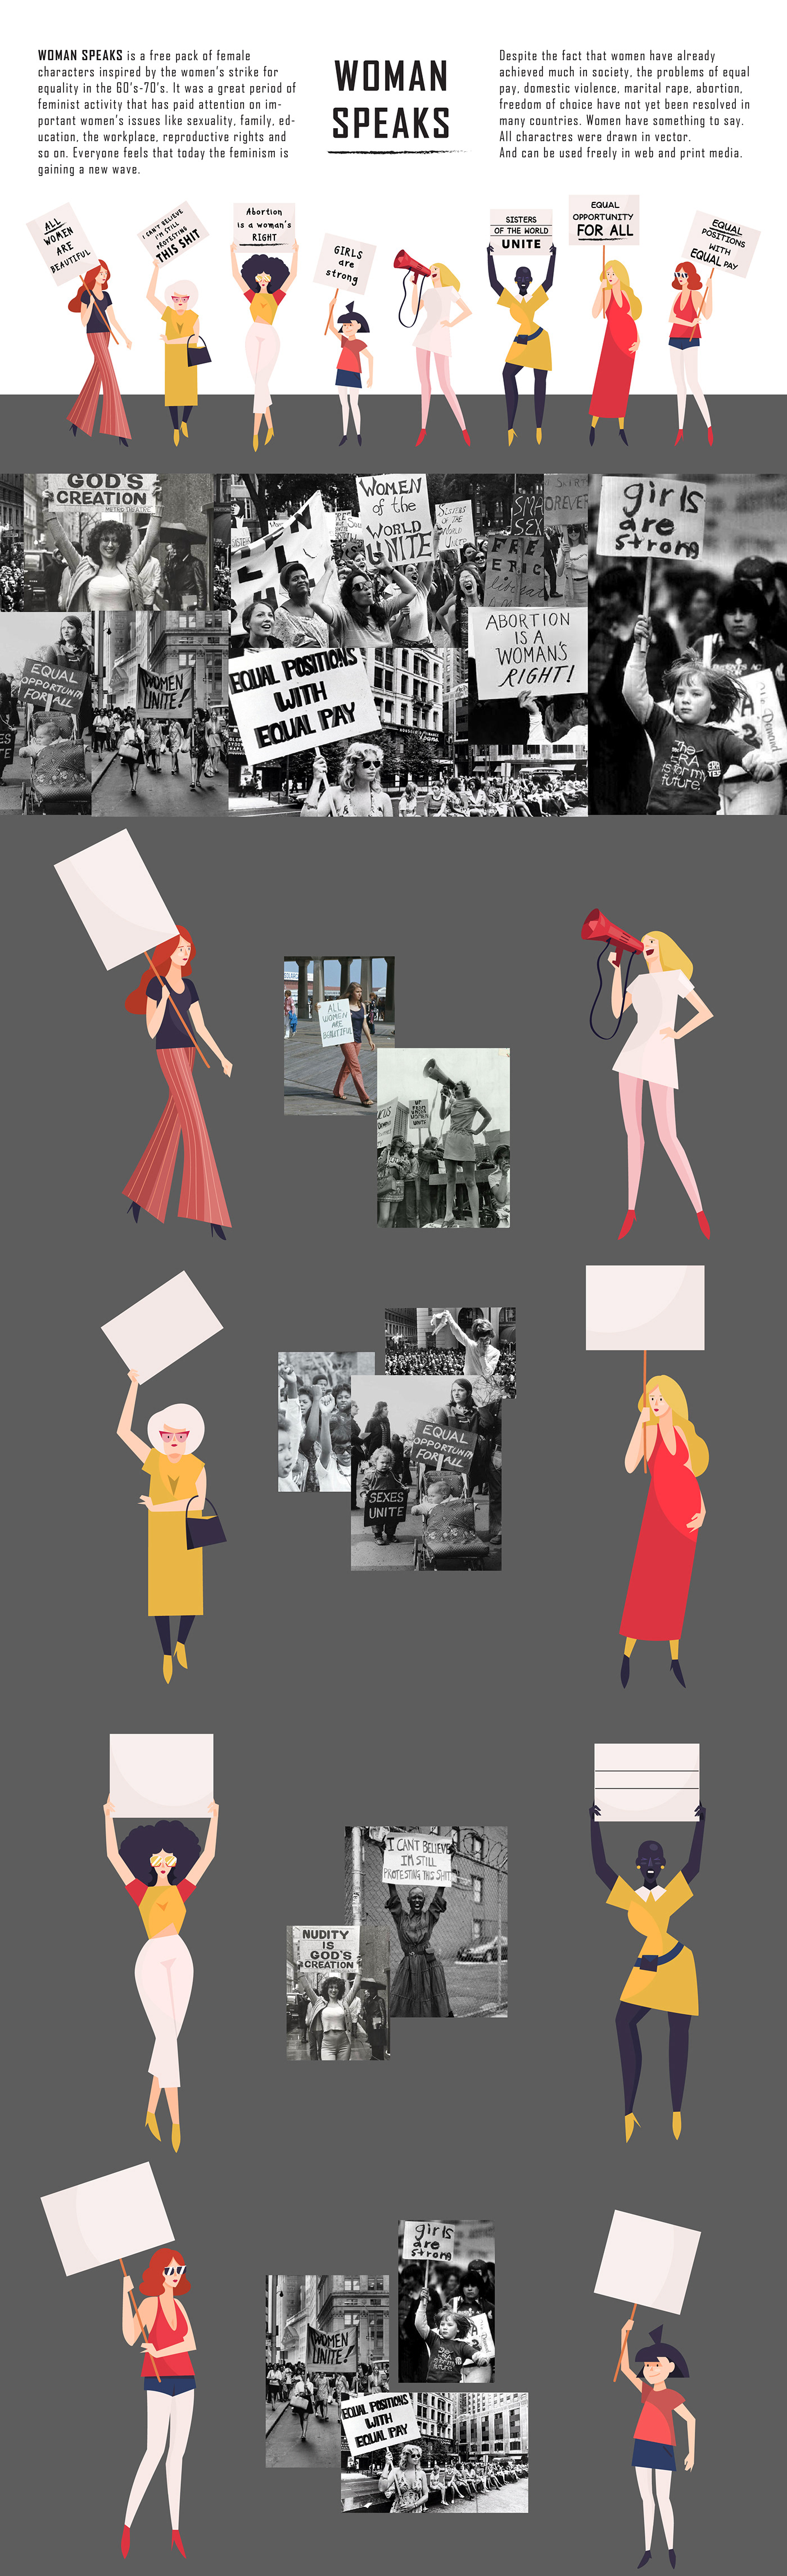 woman girl feminist feminism protest strike equality rights Character characterdesign